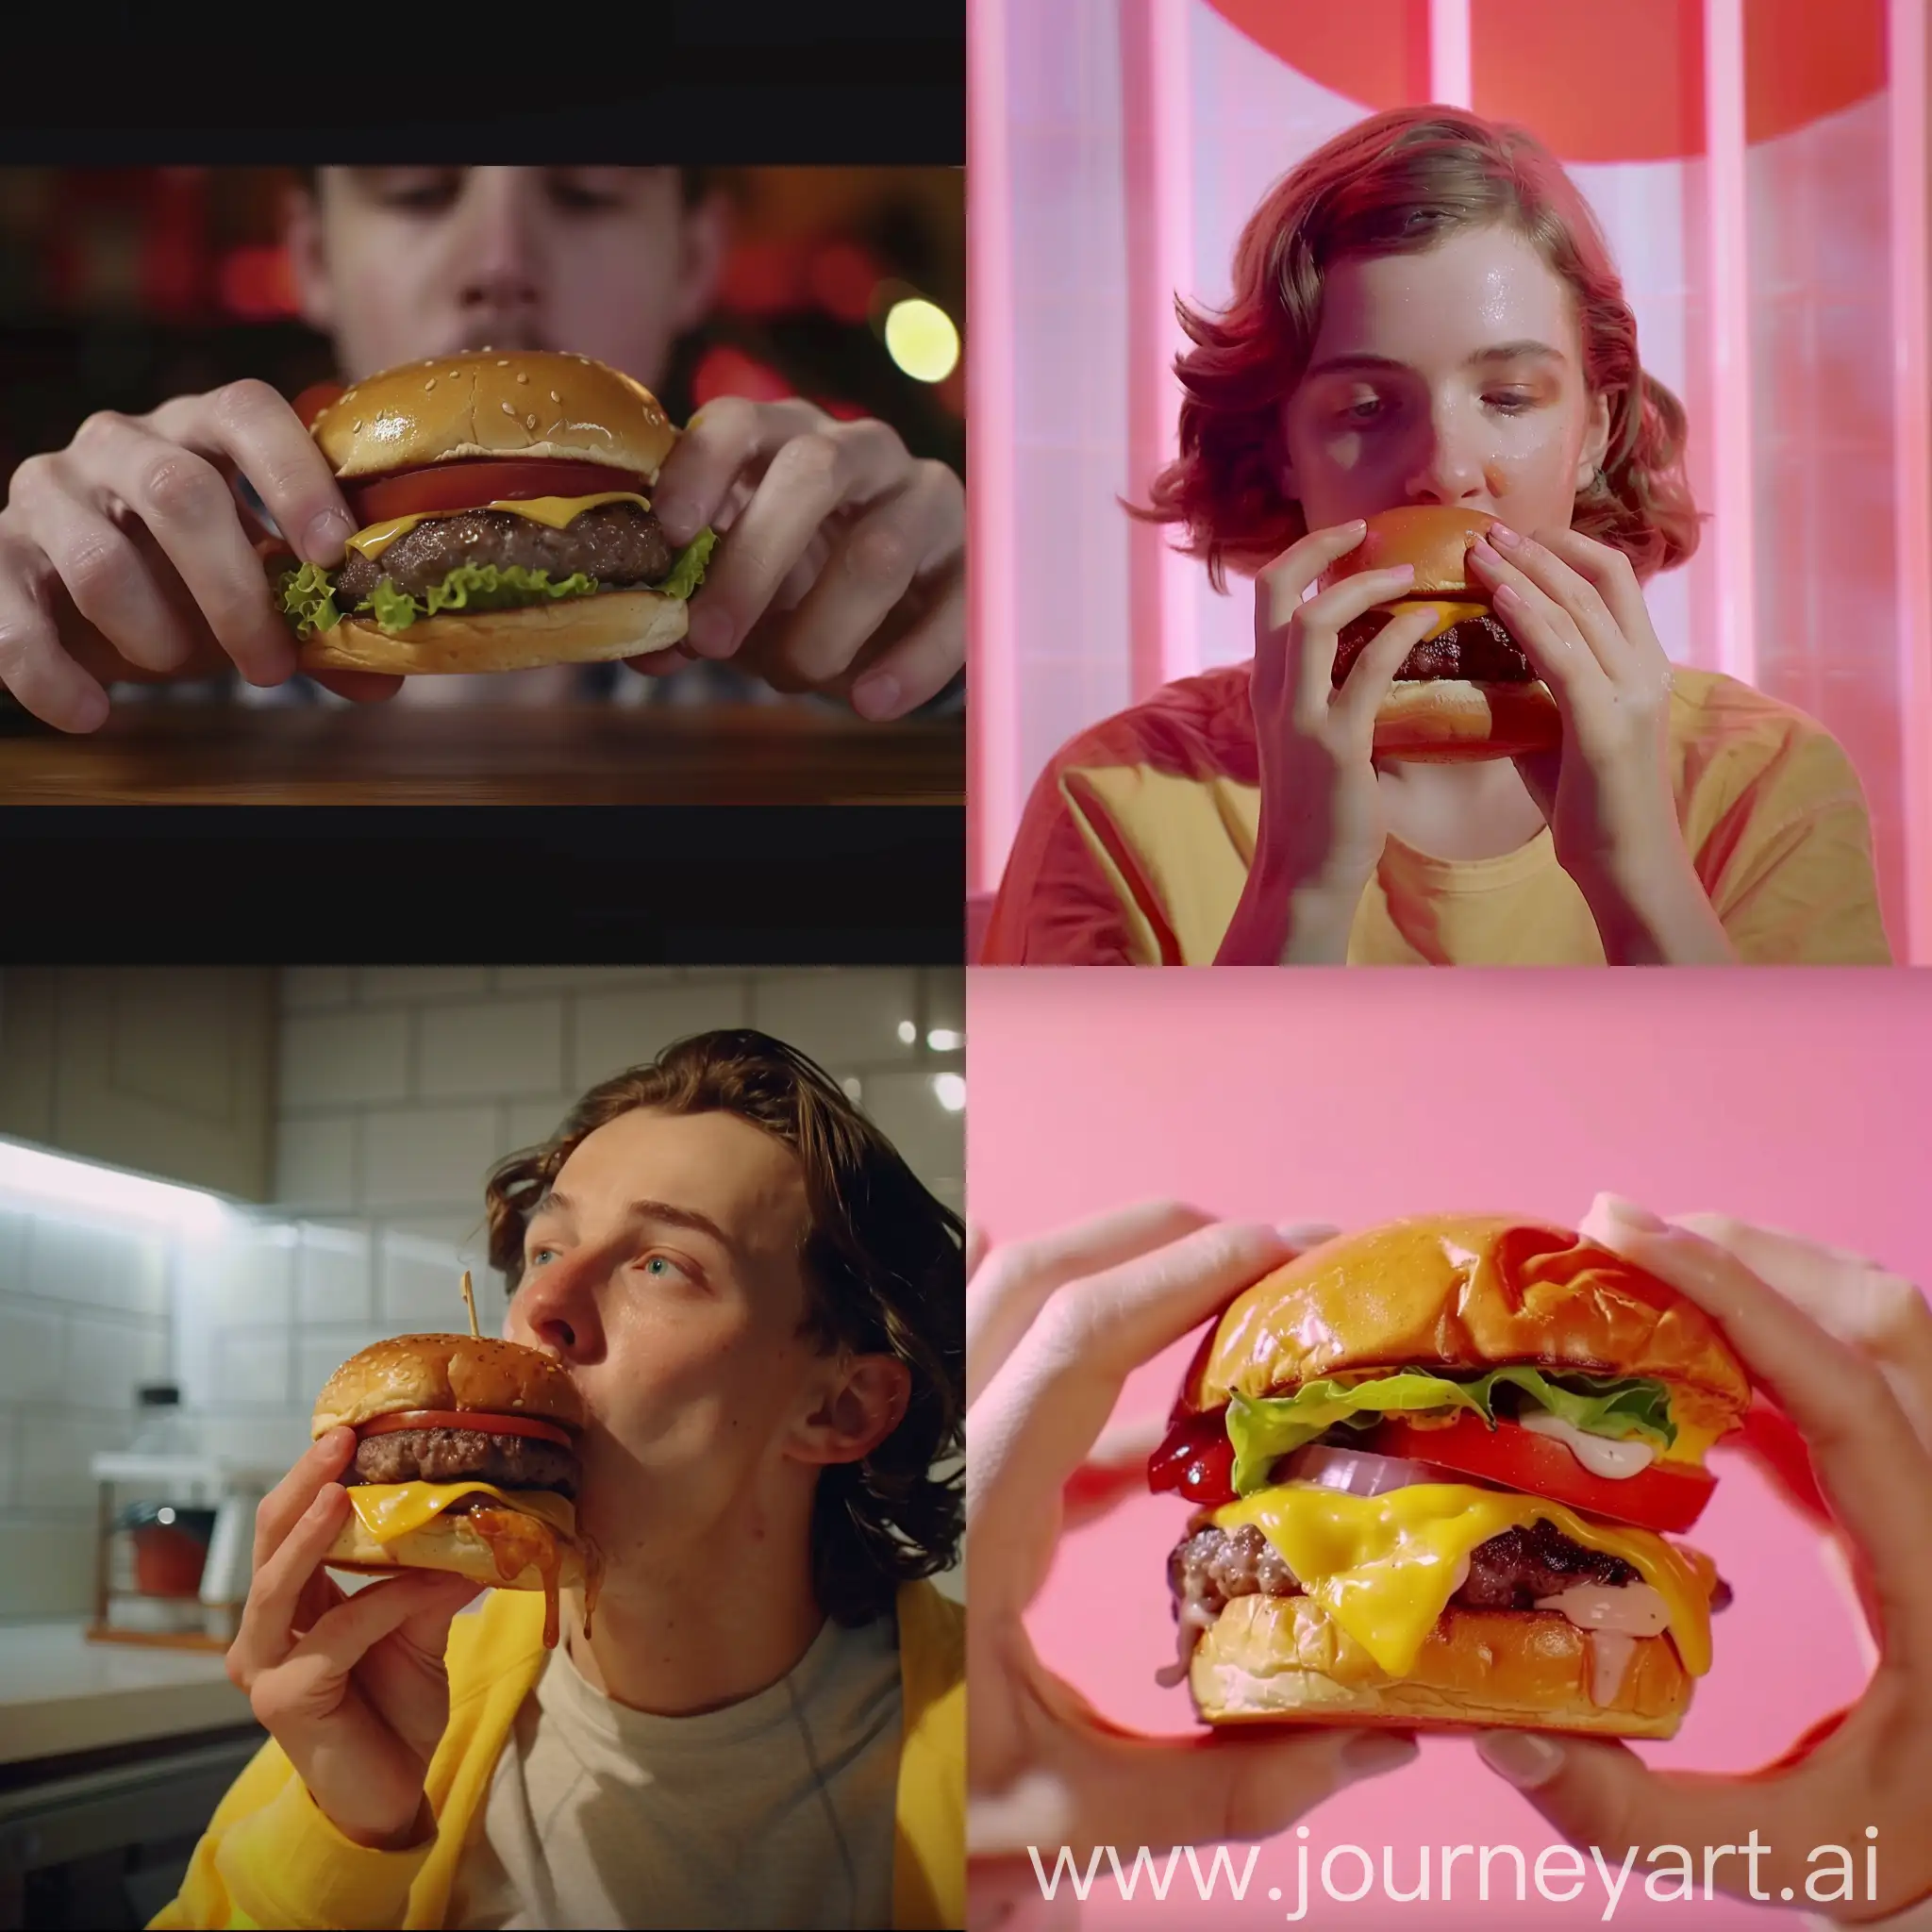 Savoring-a-Delicious-Burger-in-Cinematic-Style